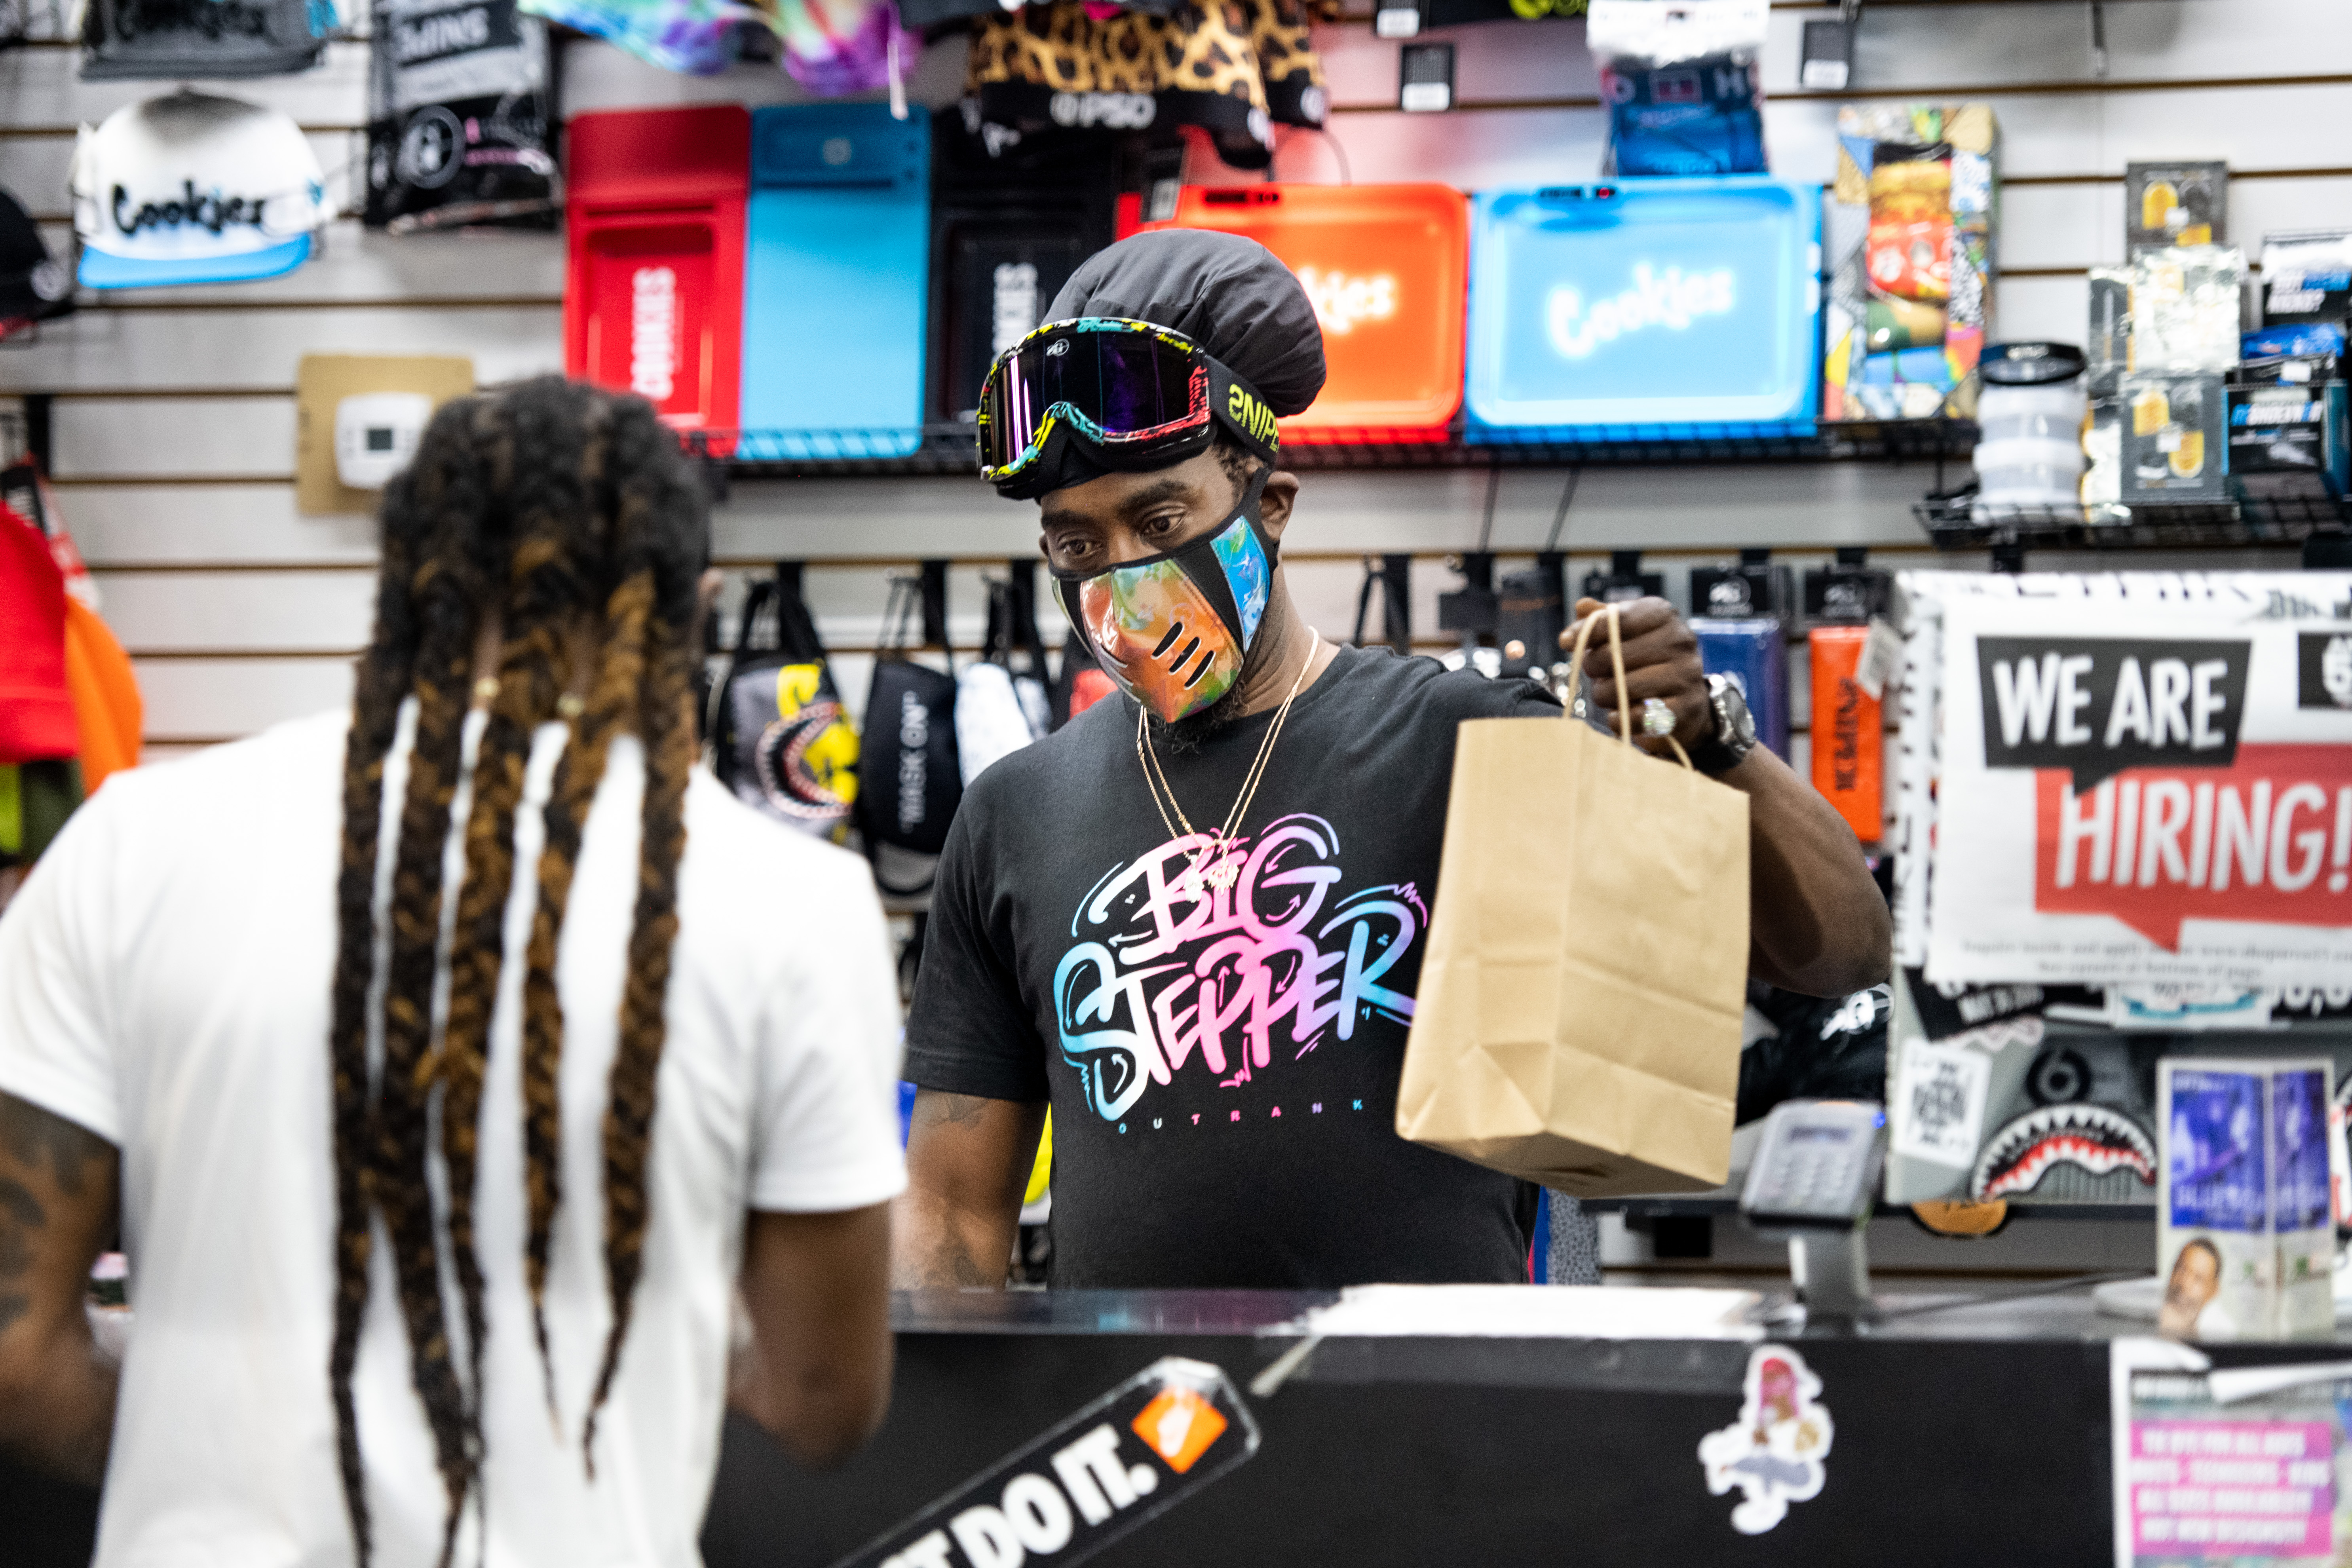 Small business owner Birl Hicks helps a customer at Columbia Place Mall in Columbia, South Carolina on April 24, 2020.